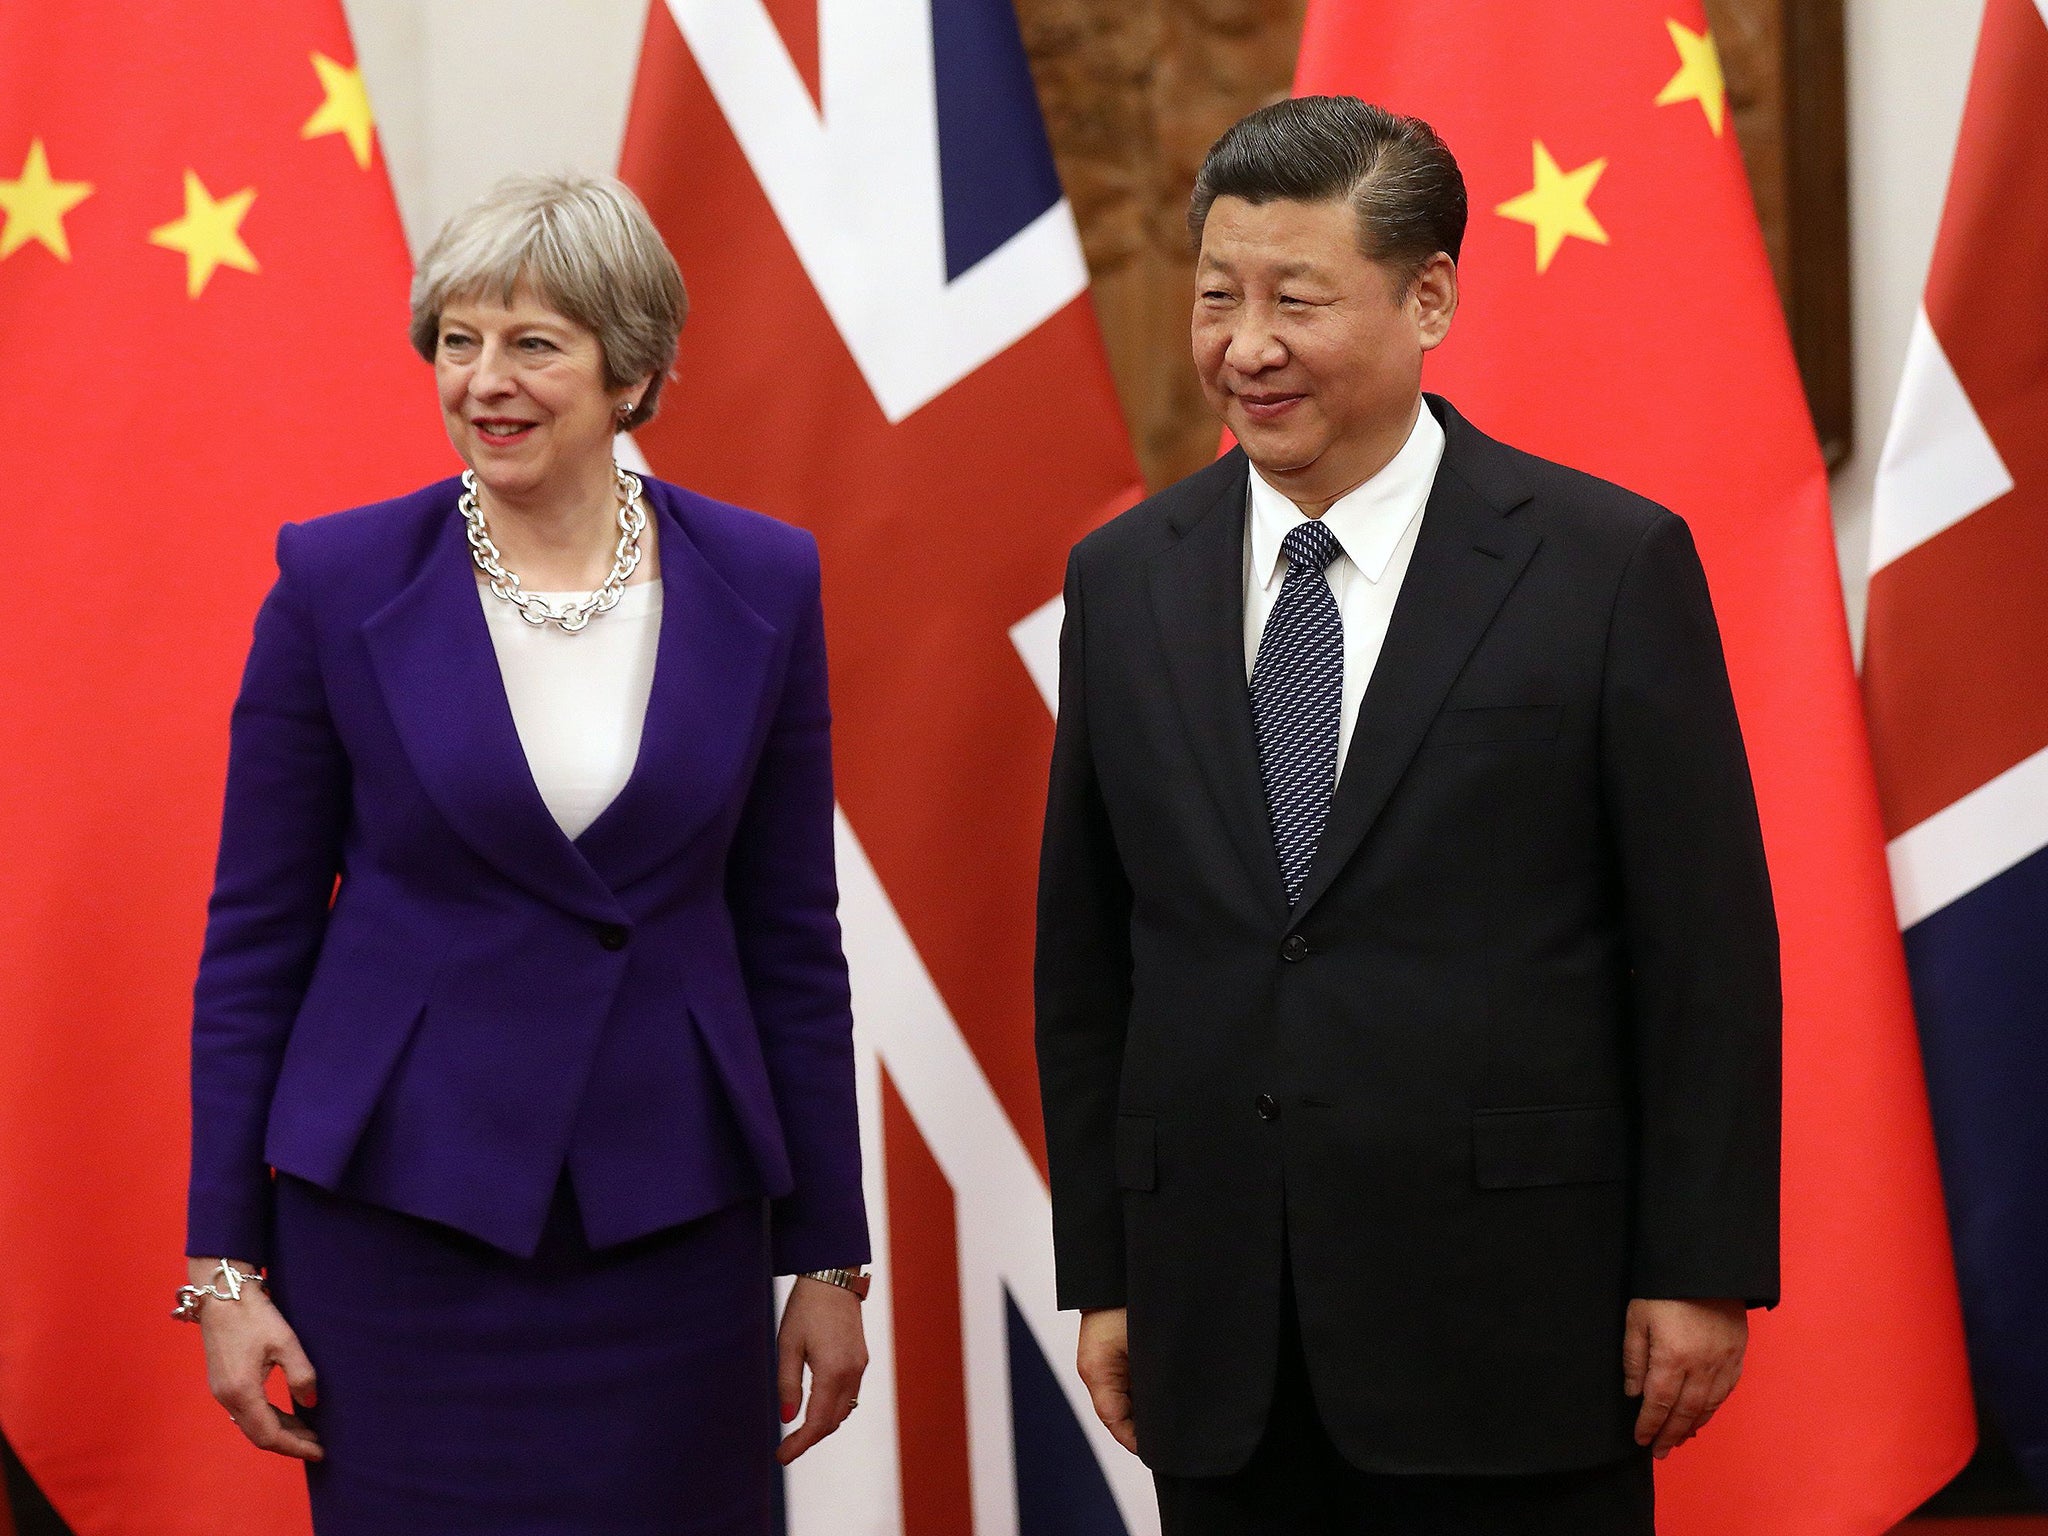 China takes £17bn of British exports, compared to £240bn from the EU every year